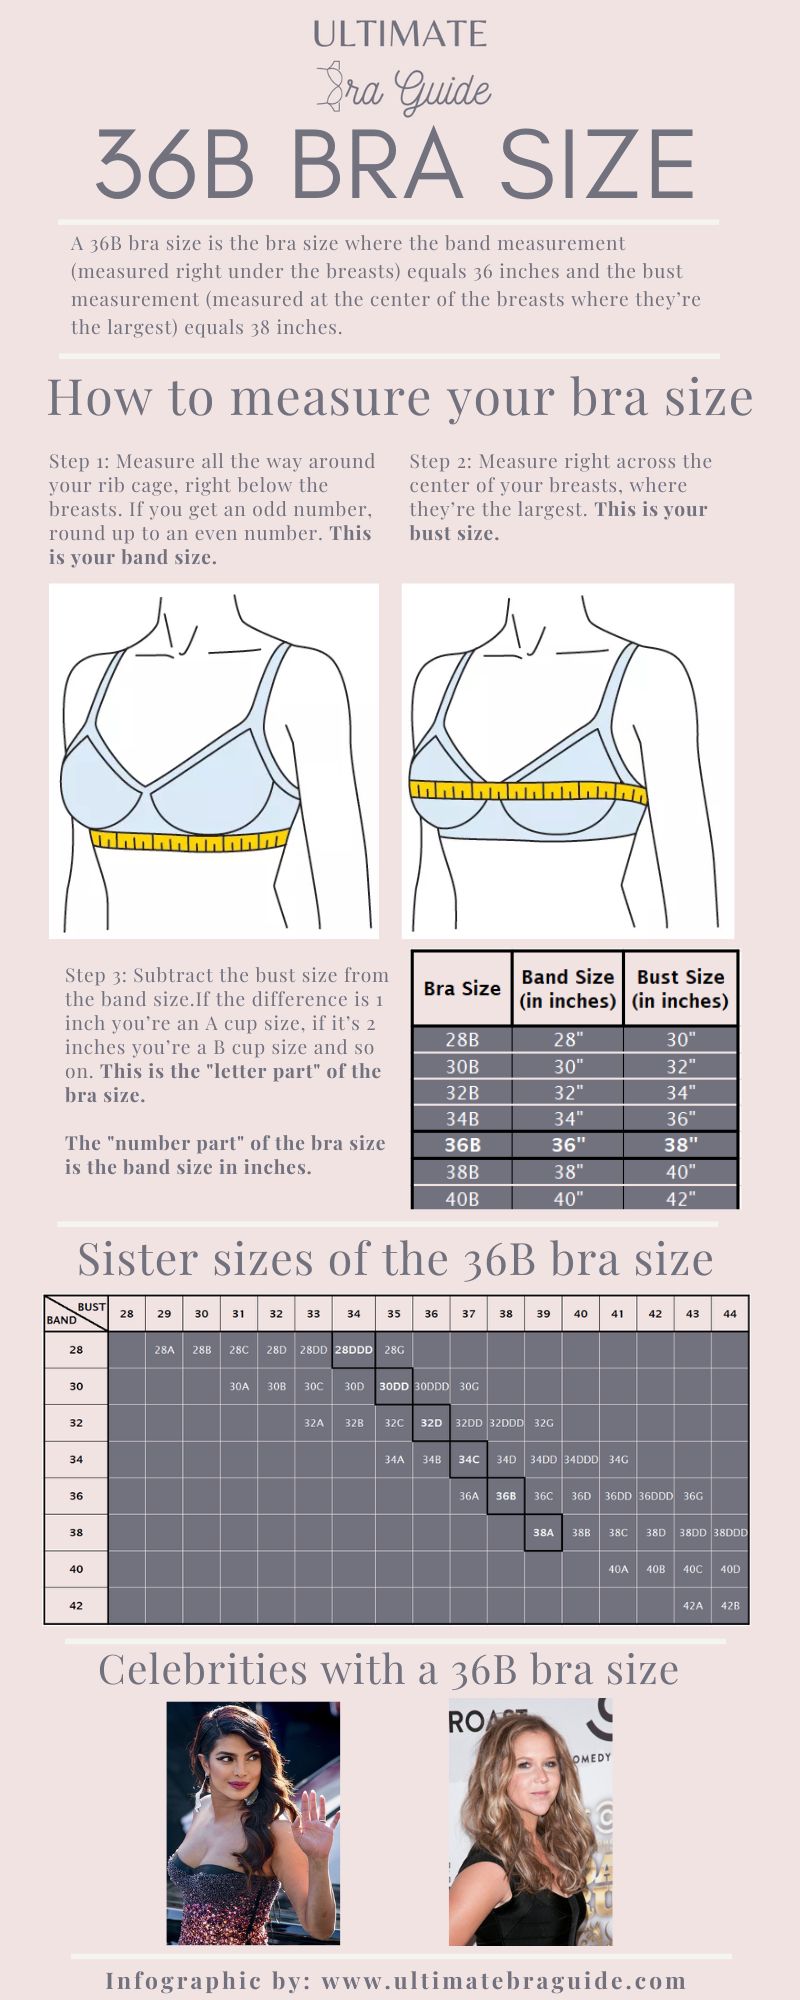 An infographic all about the 36B bra size - what it is, how to measure if you're 36B bra size, 36B bra sister sizes, 36B cup examples, and so on